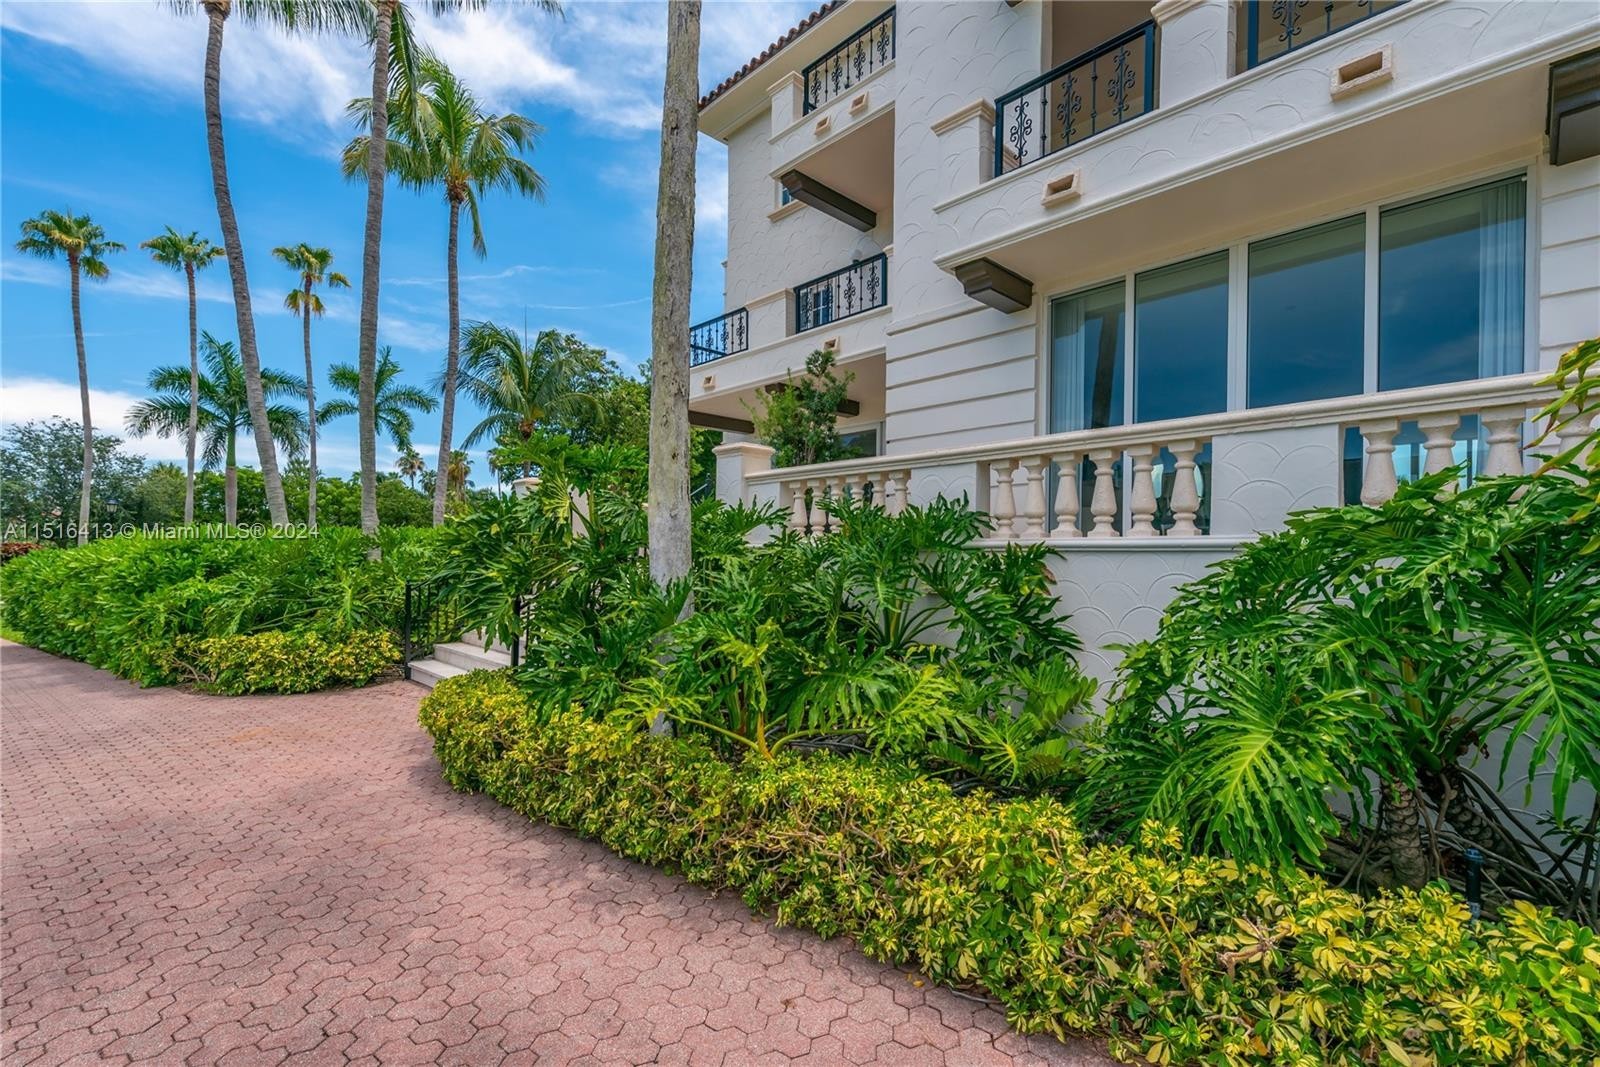 42. 2514 Fisher Island Dr